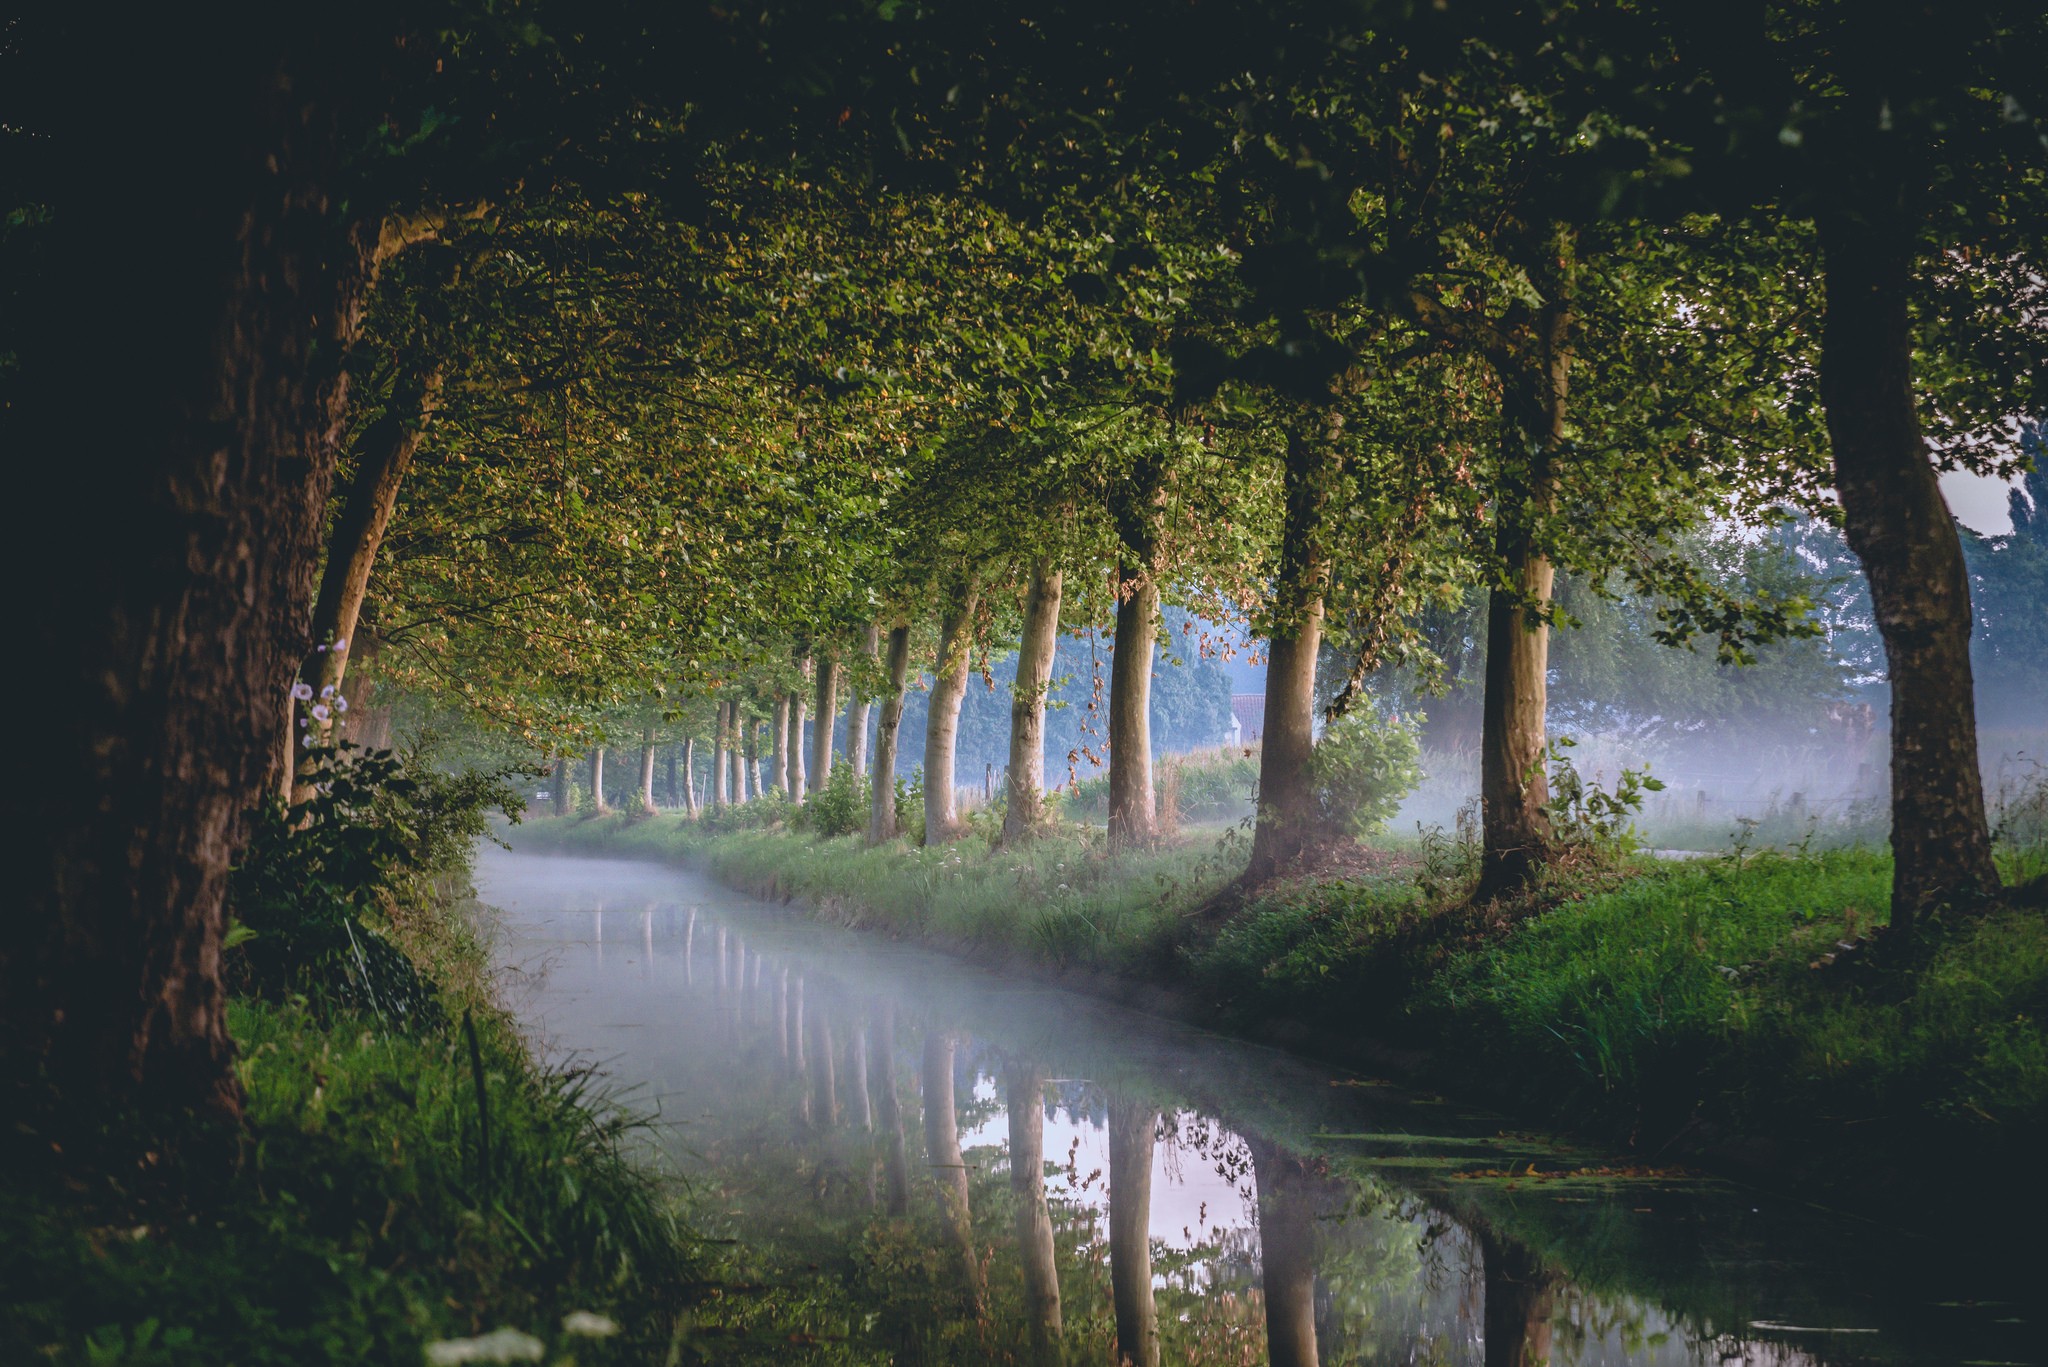 General 2048x1367 trees canal river mist morning nature